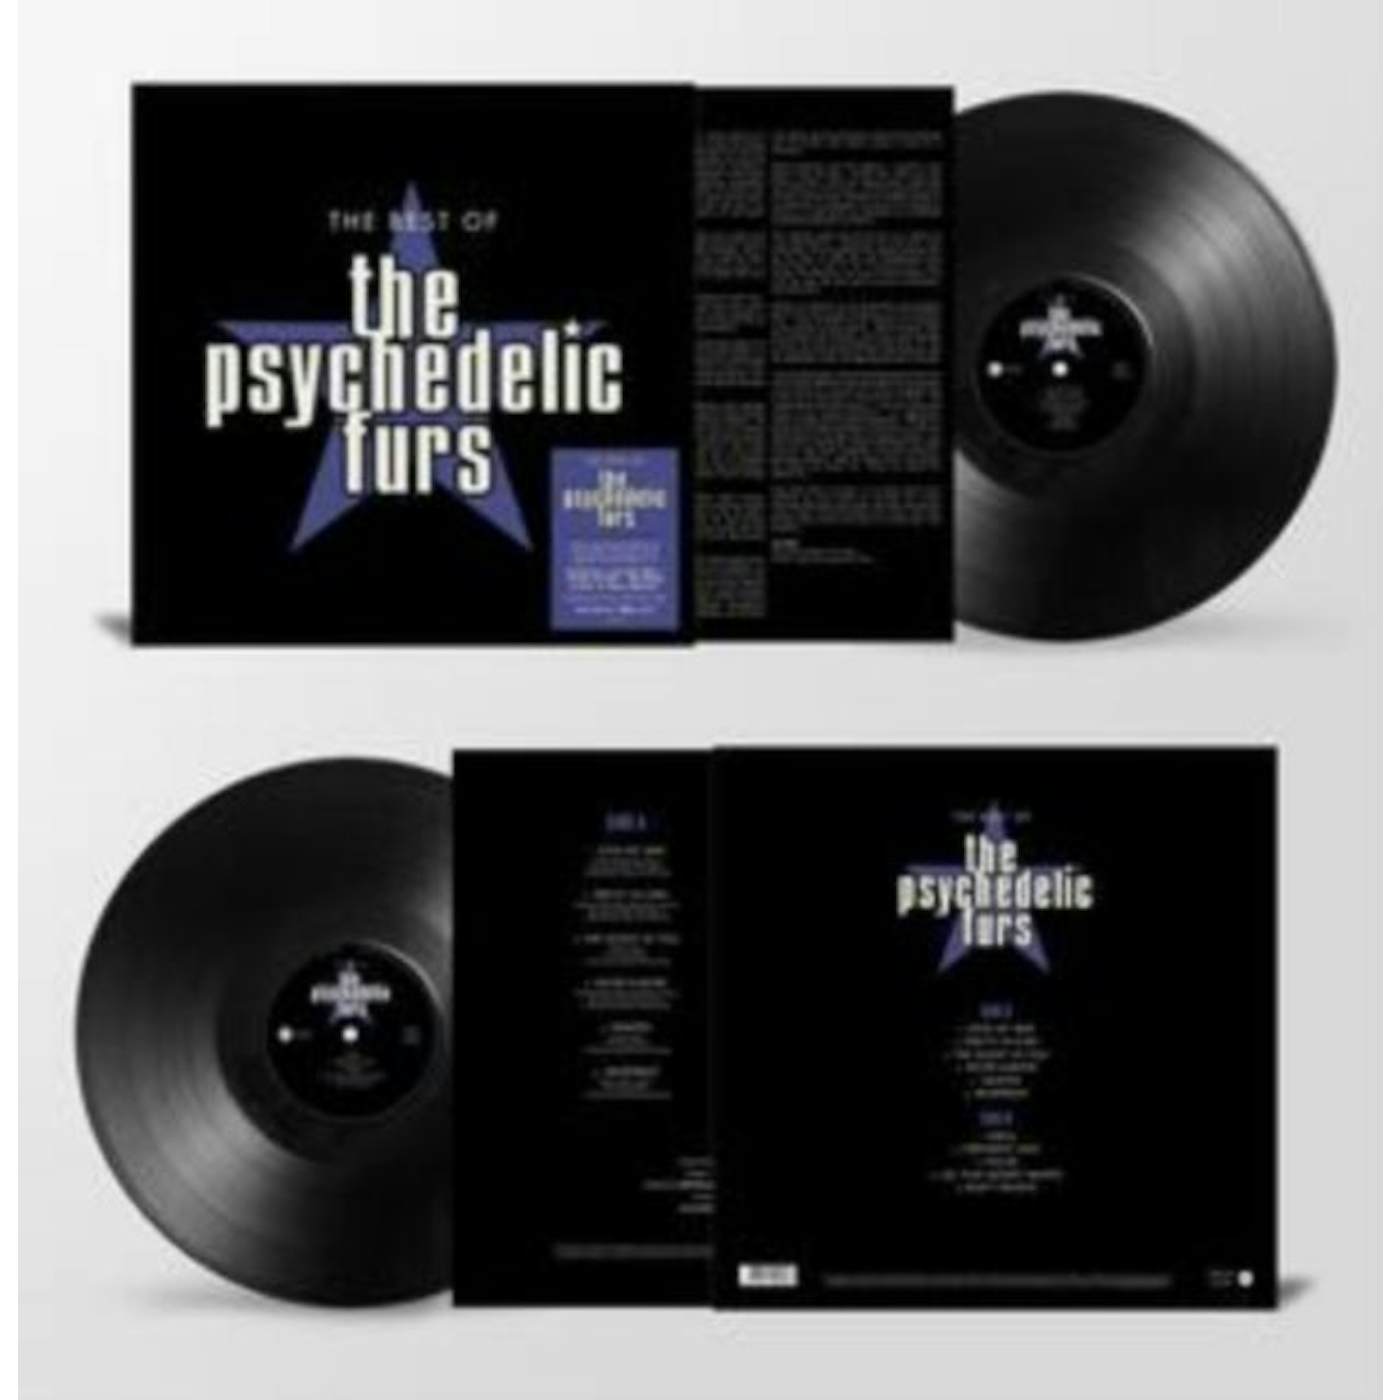 The Psychedelic Furs LP Vinyl Record - Best Of